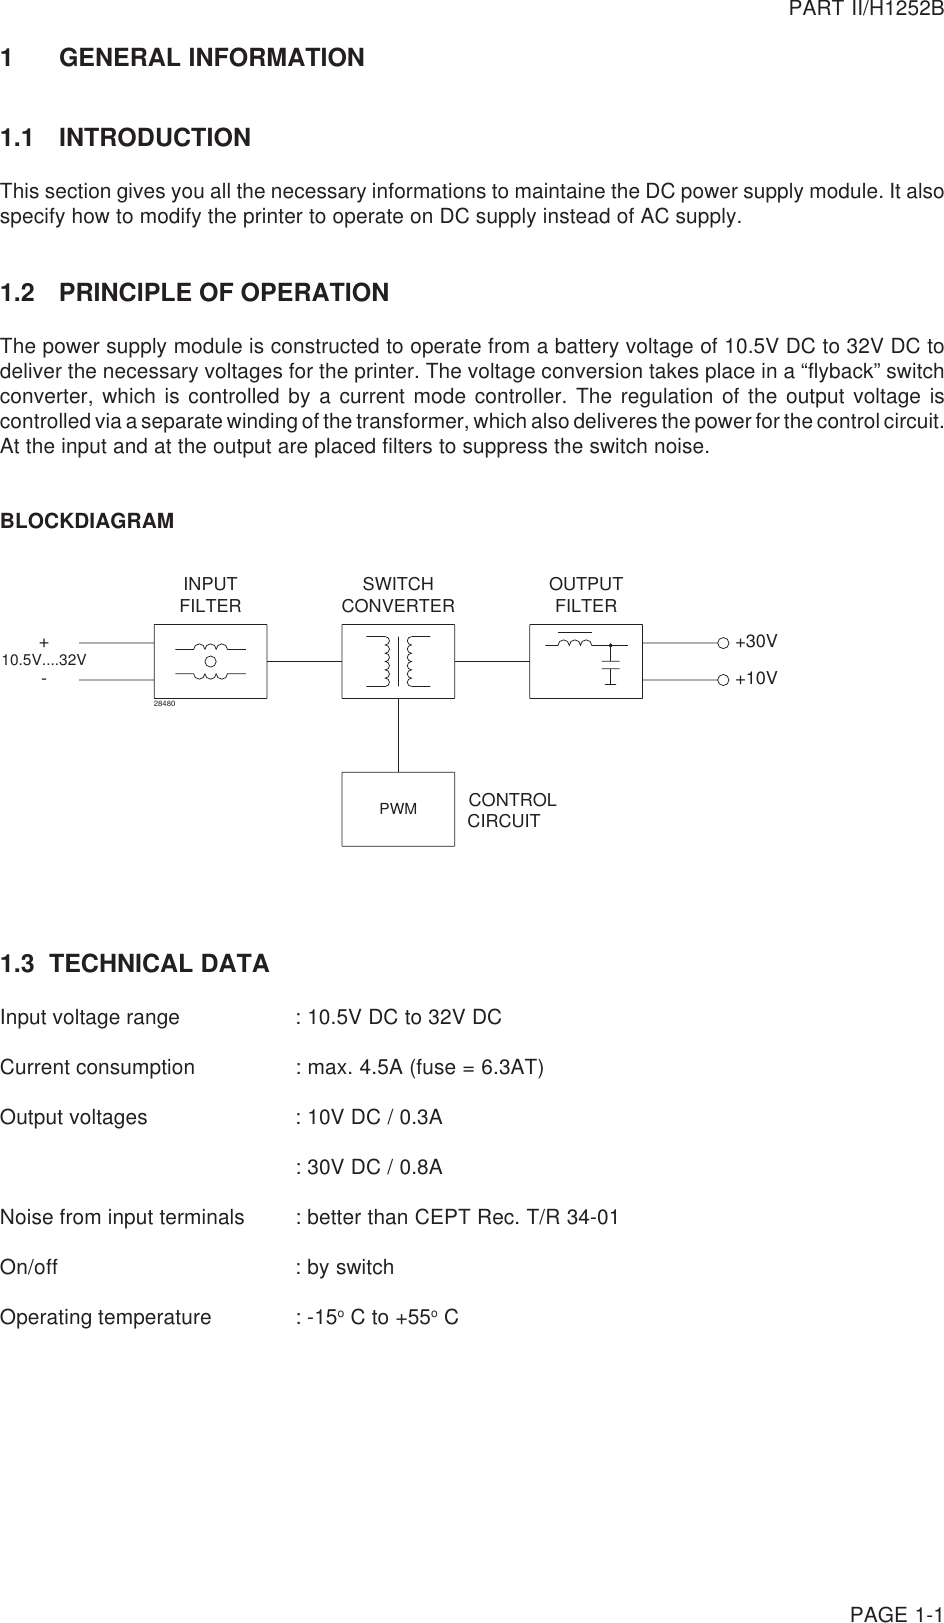 PART II/H1252BPAGE 1-11 GENERAL INFORMATION1.1 INTRODUCTIONThis section gives you all the necessary informations to maintaine the DC power supply module. It alsospecify how to modify the printer to operate on DC supply instead of AC supply.1.2 PRINCIPLE OF OPERATIONThe power supply module is constructed to operate from a battery voltage of 10.5V DC to 32V DC todeliver the necessary voltages for the printer. The voltage conversion takes place in a “flyback” switchconverter, which is controlled by a current mode controller. The regulation of the output voltage iscontrolled via a separate winding of the transformer, which also deliveres the power for the control circuit.At the input and at the output are placed filters to suppress the switch noise.BLOCKDIAGRAMPWMINPUTFILTER CONVERTERSWITCH FILTEROUTPUTCONTROLCIRCUIT+-10.5V....32V +30V+10V284801.3  TECHNICAL DATAInput voltage range : 10.5V DC to 32V DCCurrent consumption : max. 4.5A (fuse = 6.3AT)Output voltages : 10V DC / 0.3A: 30V DC / 0.8ANoise from input terminals : better than CEPT Rec. T/R 34-01On/off : by switchOperating temperature : -15o C to +55o C